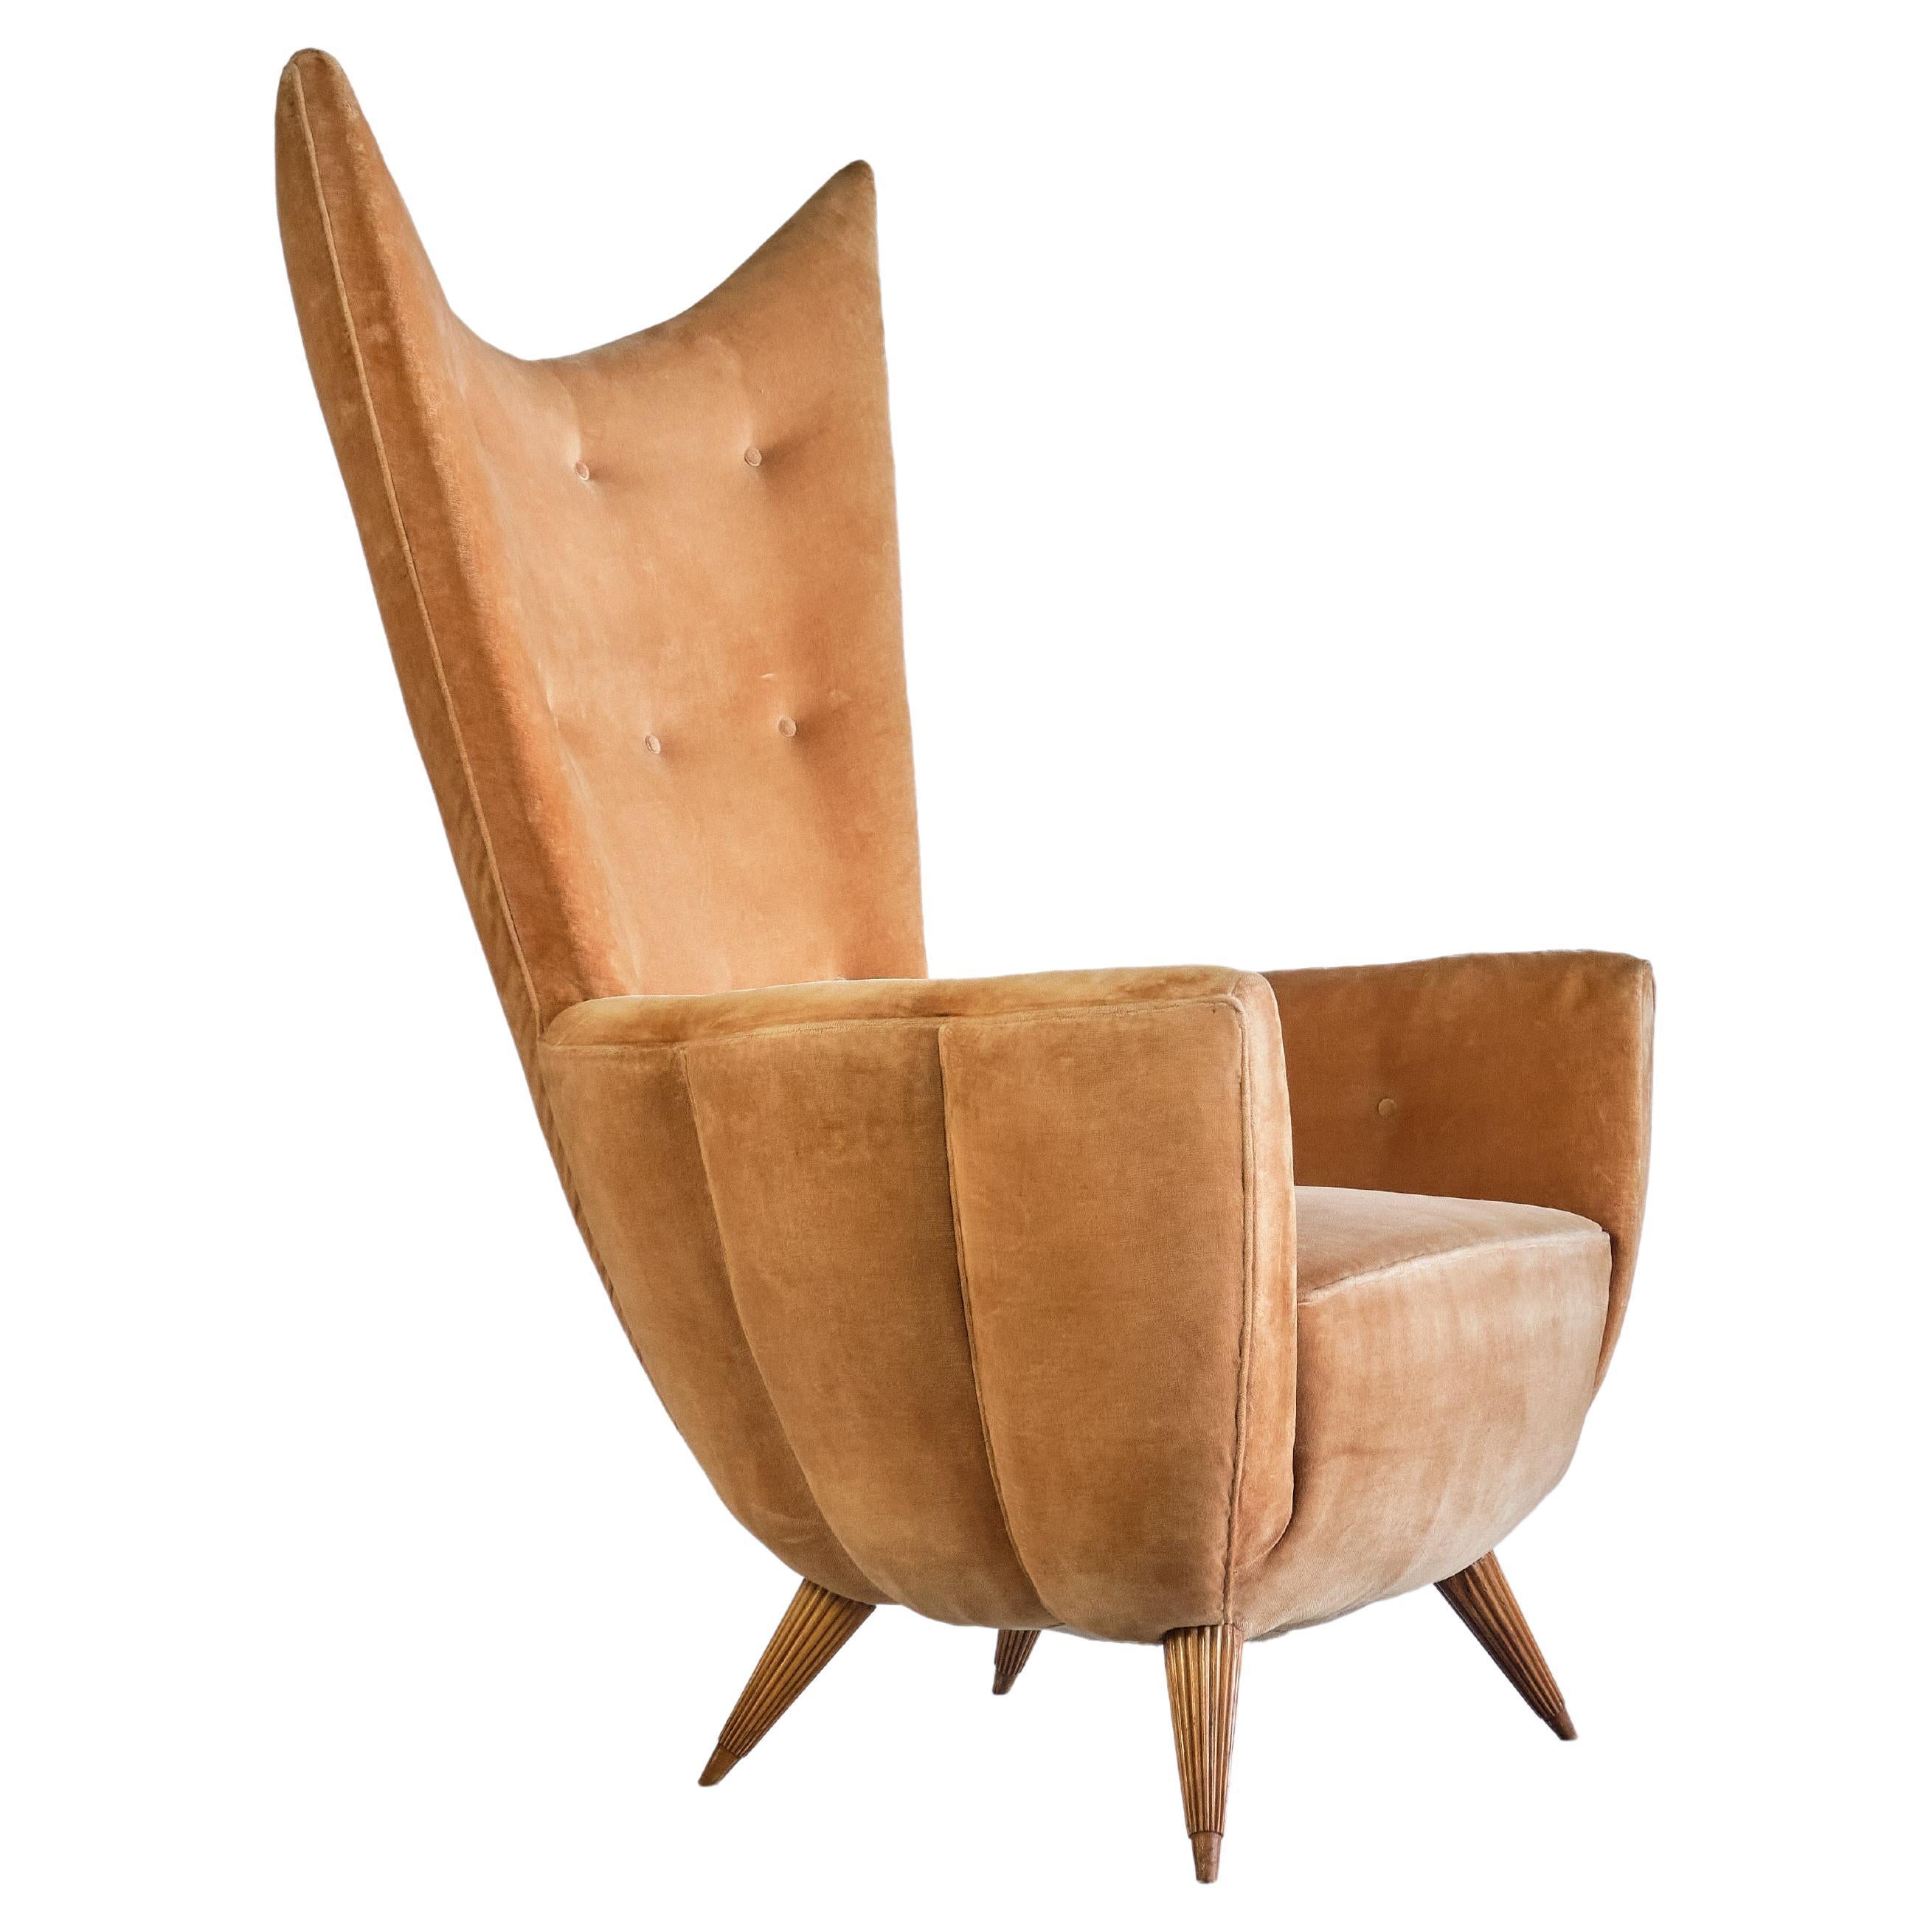 Exceptional Guglielmo Ulrich Armchair in Velvet and Fluted Walnut, Italy, 1940s For Sale